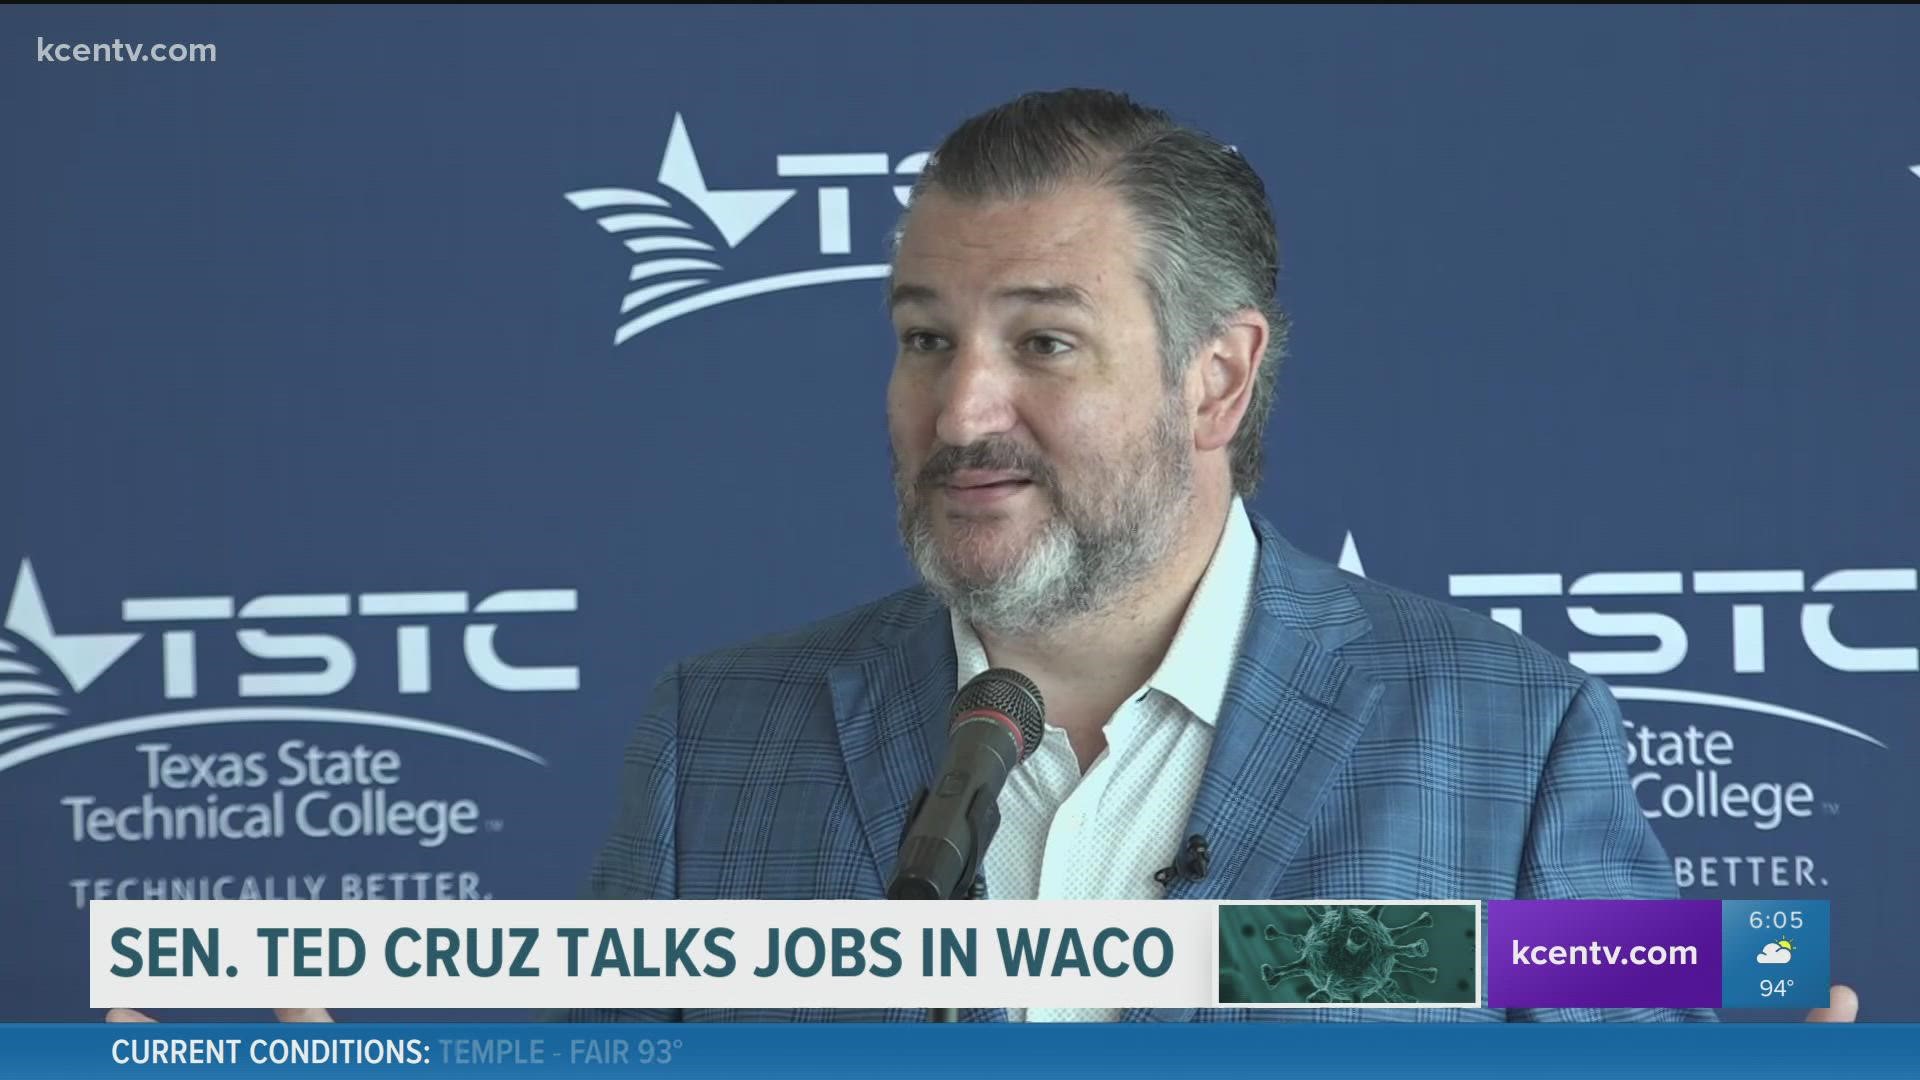 In addition to the speaking about the workforce and how technical school play a role in it, Cruz mentioned legislation he fired to help provide scholarship funds.